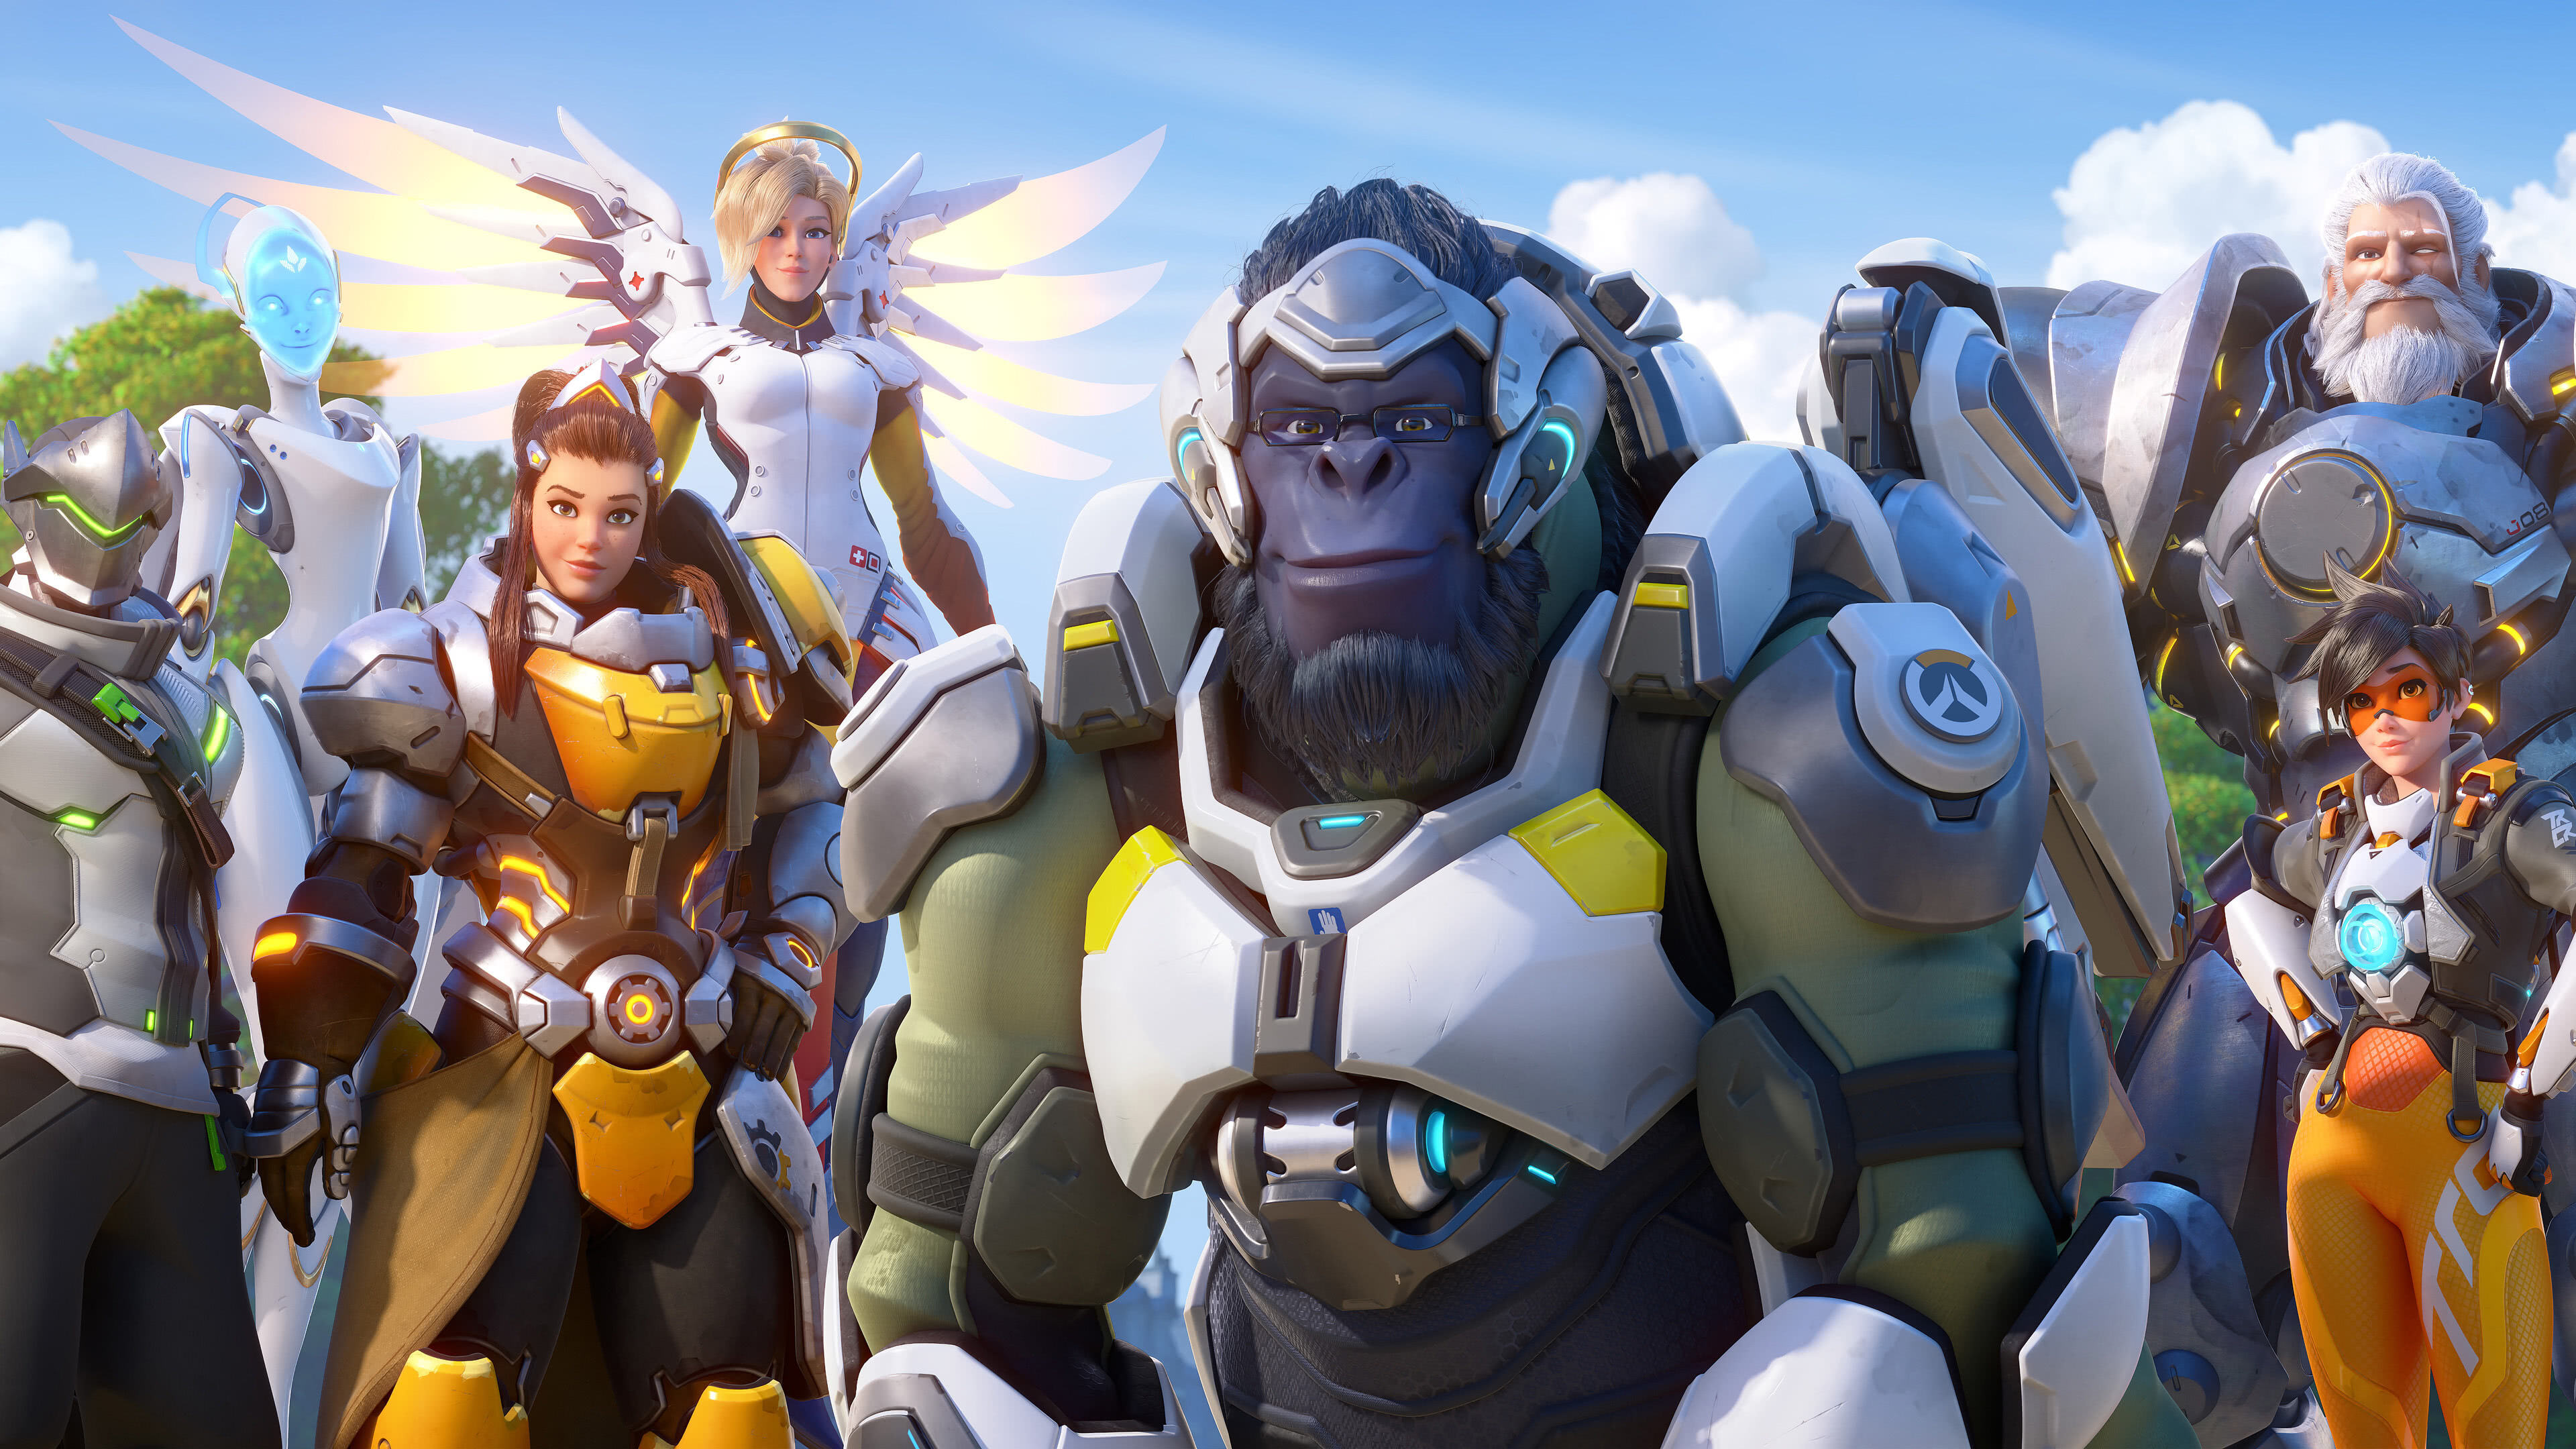 Overwatch 2 Characters Uhd 4k Wallpaper Pixelz Download, share or upload your own one! overwatch 2 characters uhd 4k wallpaper